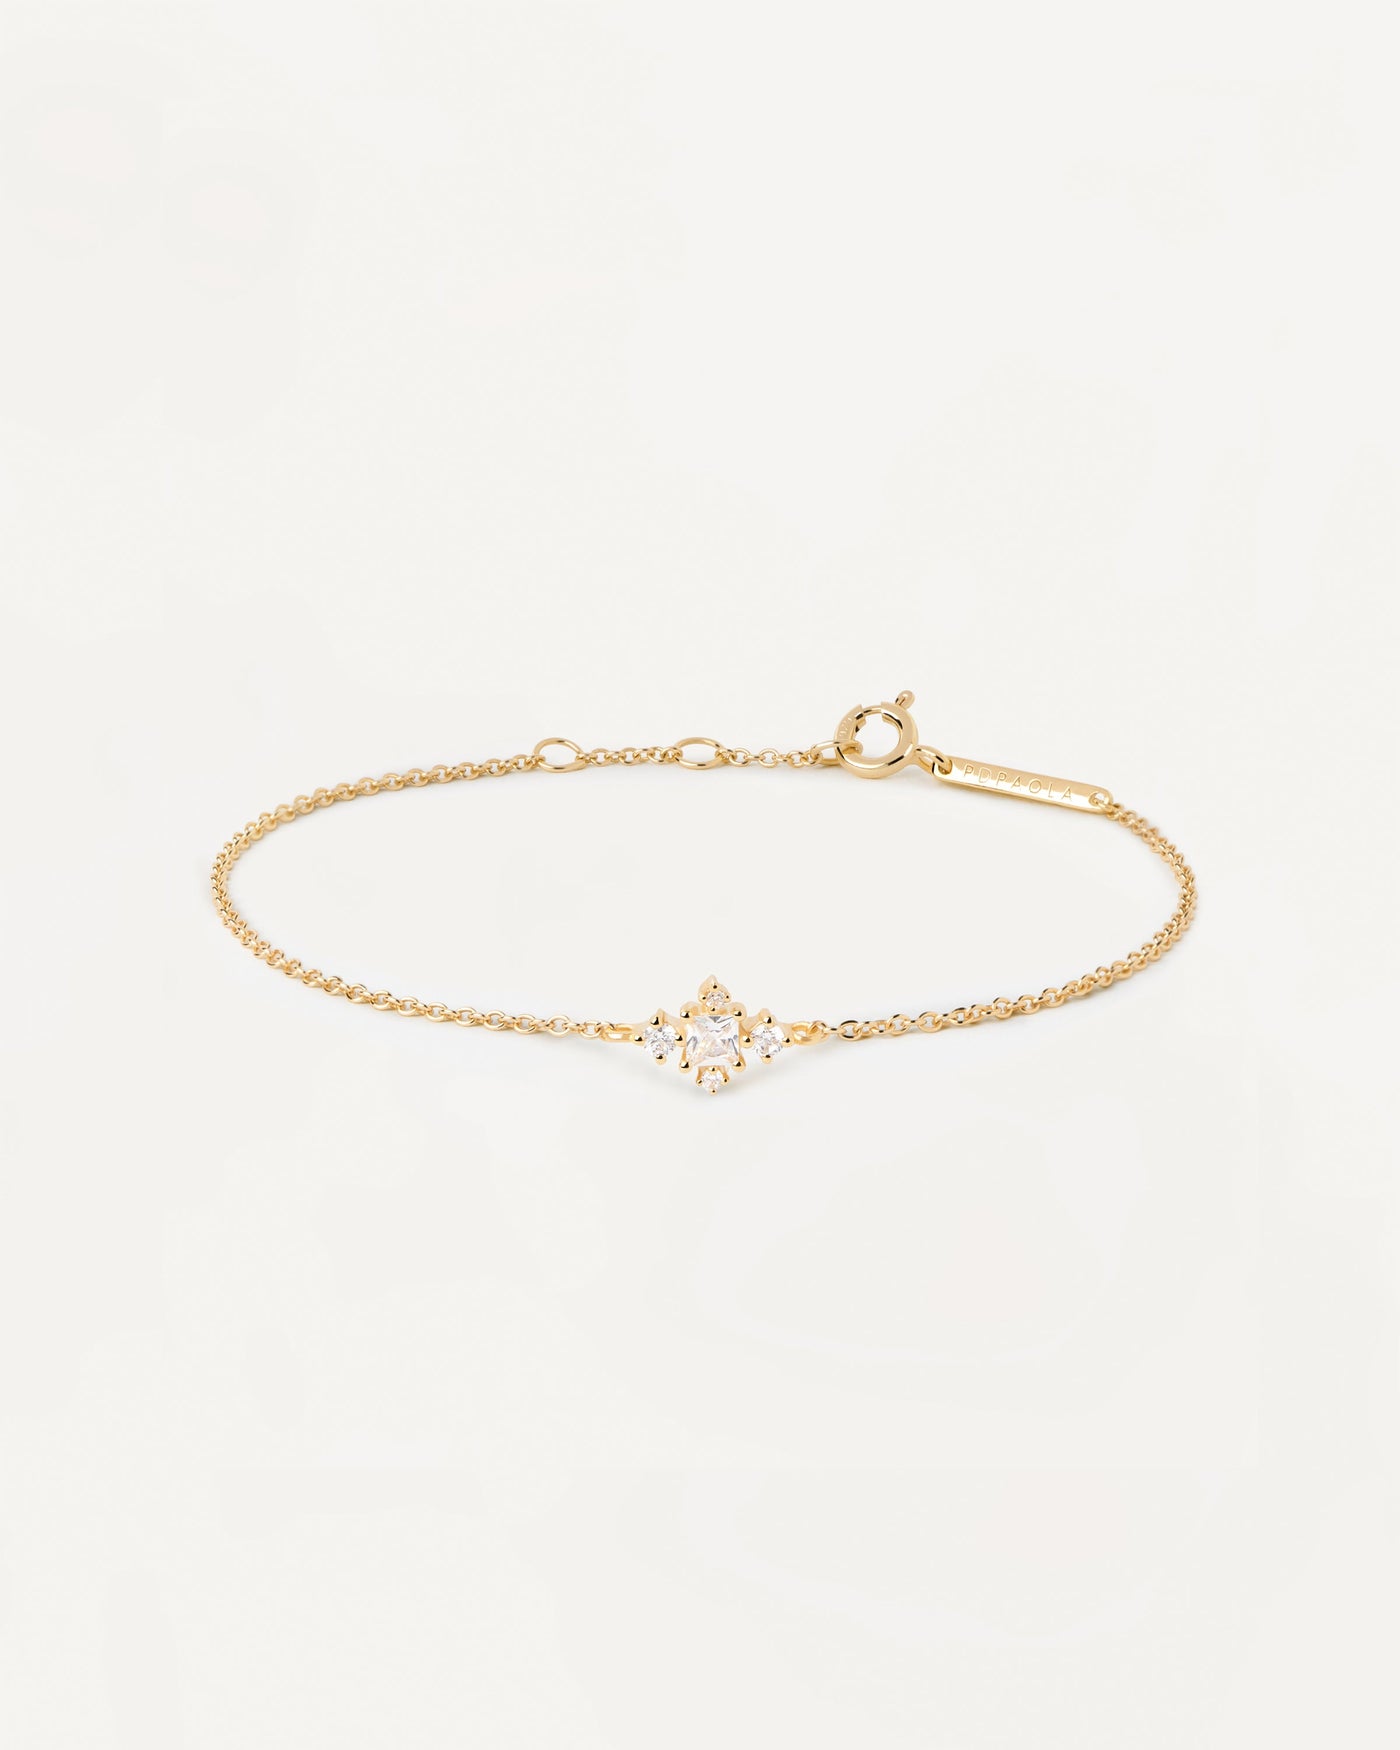 2023 Selection | Laura Bracelet. Dainty gold-plated chain bracelet with white zirconia motiv. Get the latest arrival from PDPAOLA. Place your order safely and get this Best Seller. Free Shipping.